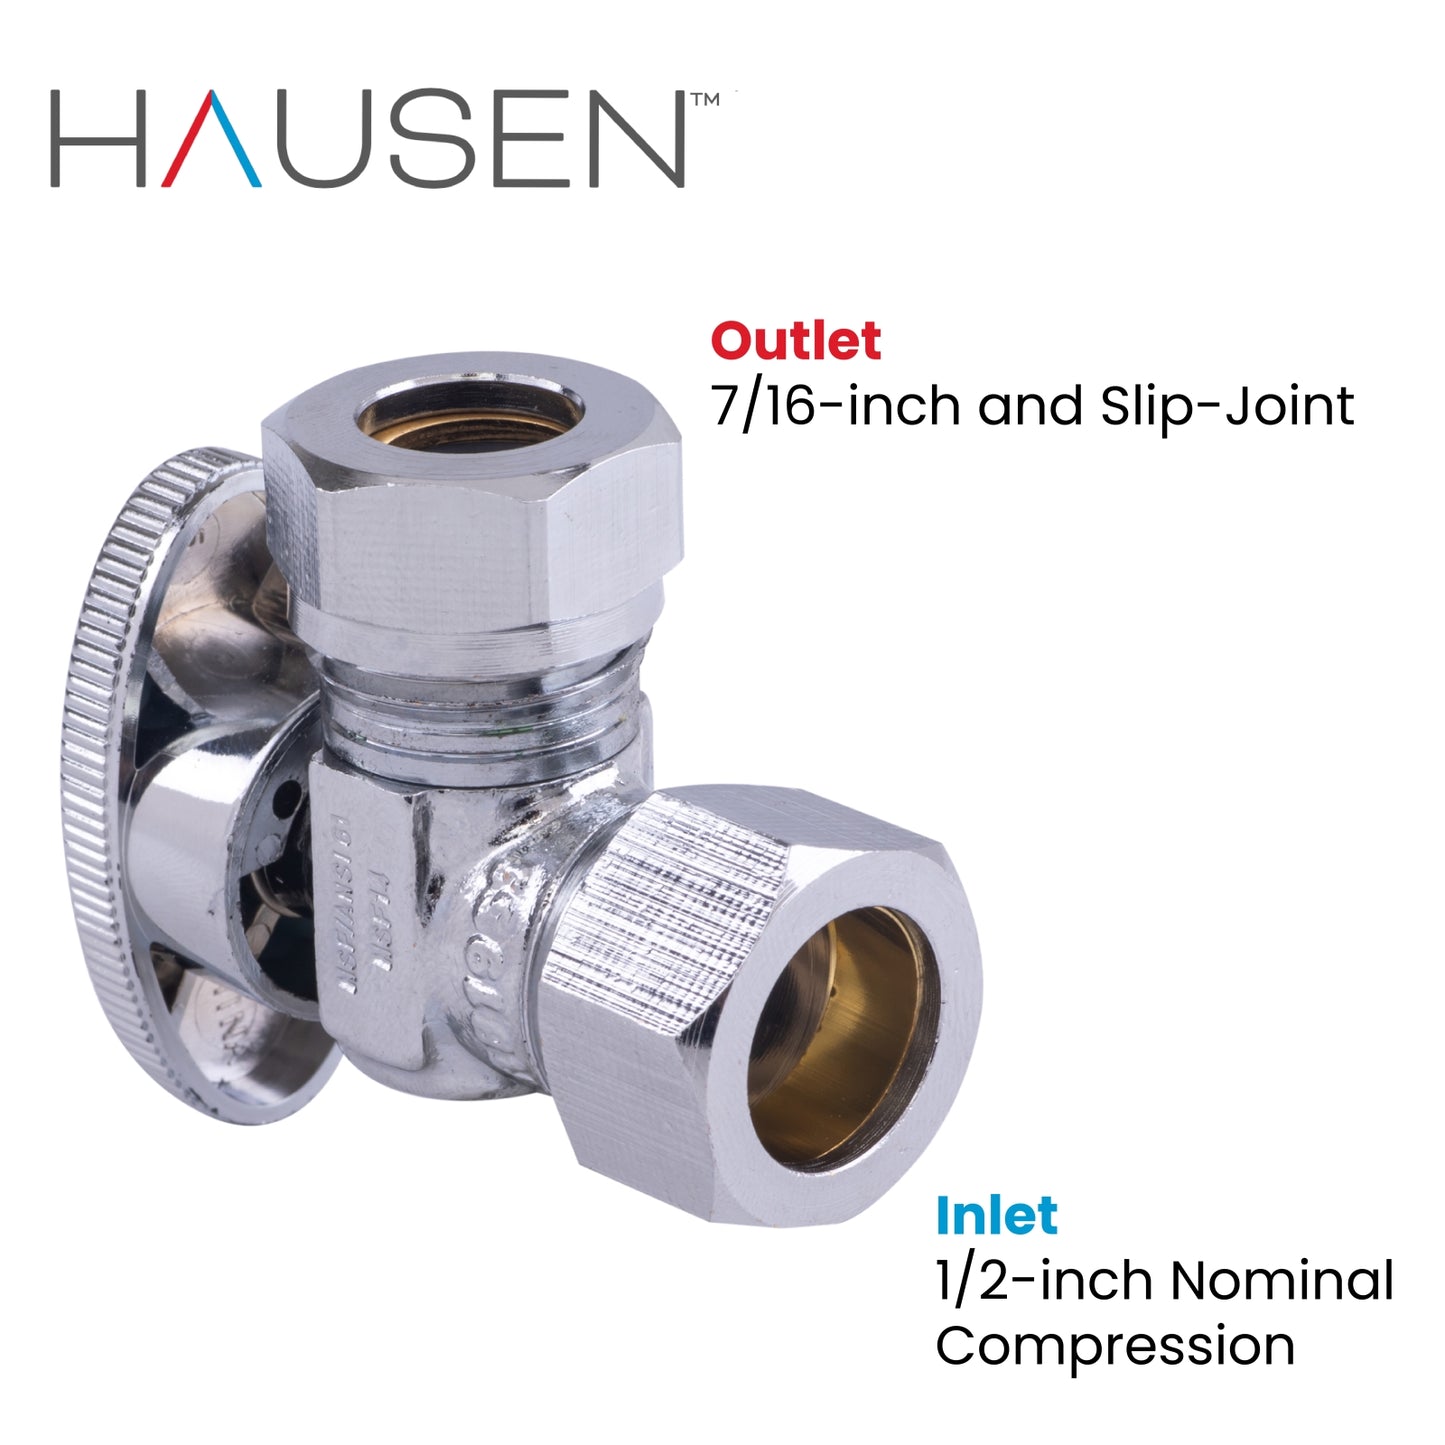 Hausen 1/2-inch Nominal Compression Inlet x 7/16-inch and 1/2-inch Slip-Joint Outlet 1/4-Turn Angle Water Stop; Lead-Free Forged Brass; Chrome-Plated; Compatible with Copper Piping, 5-Pack